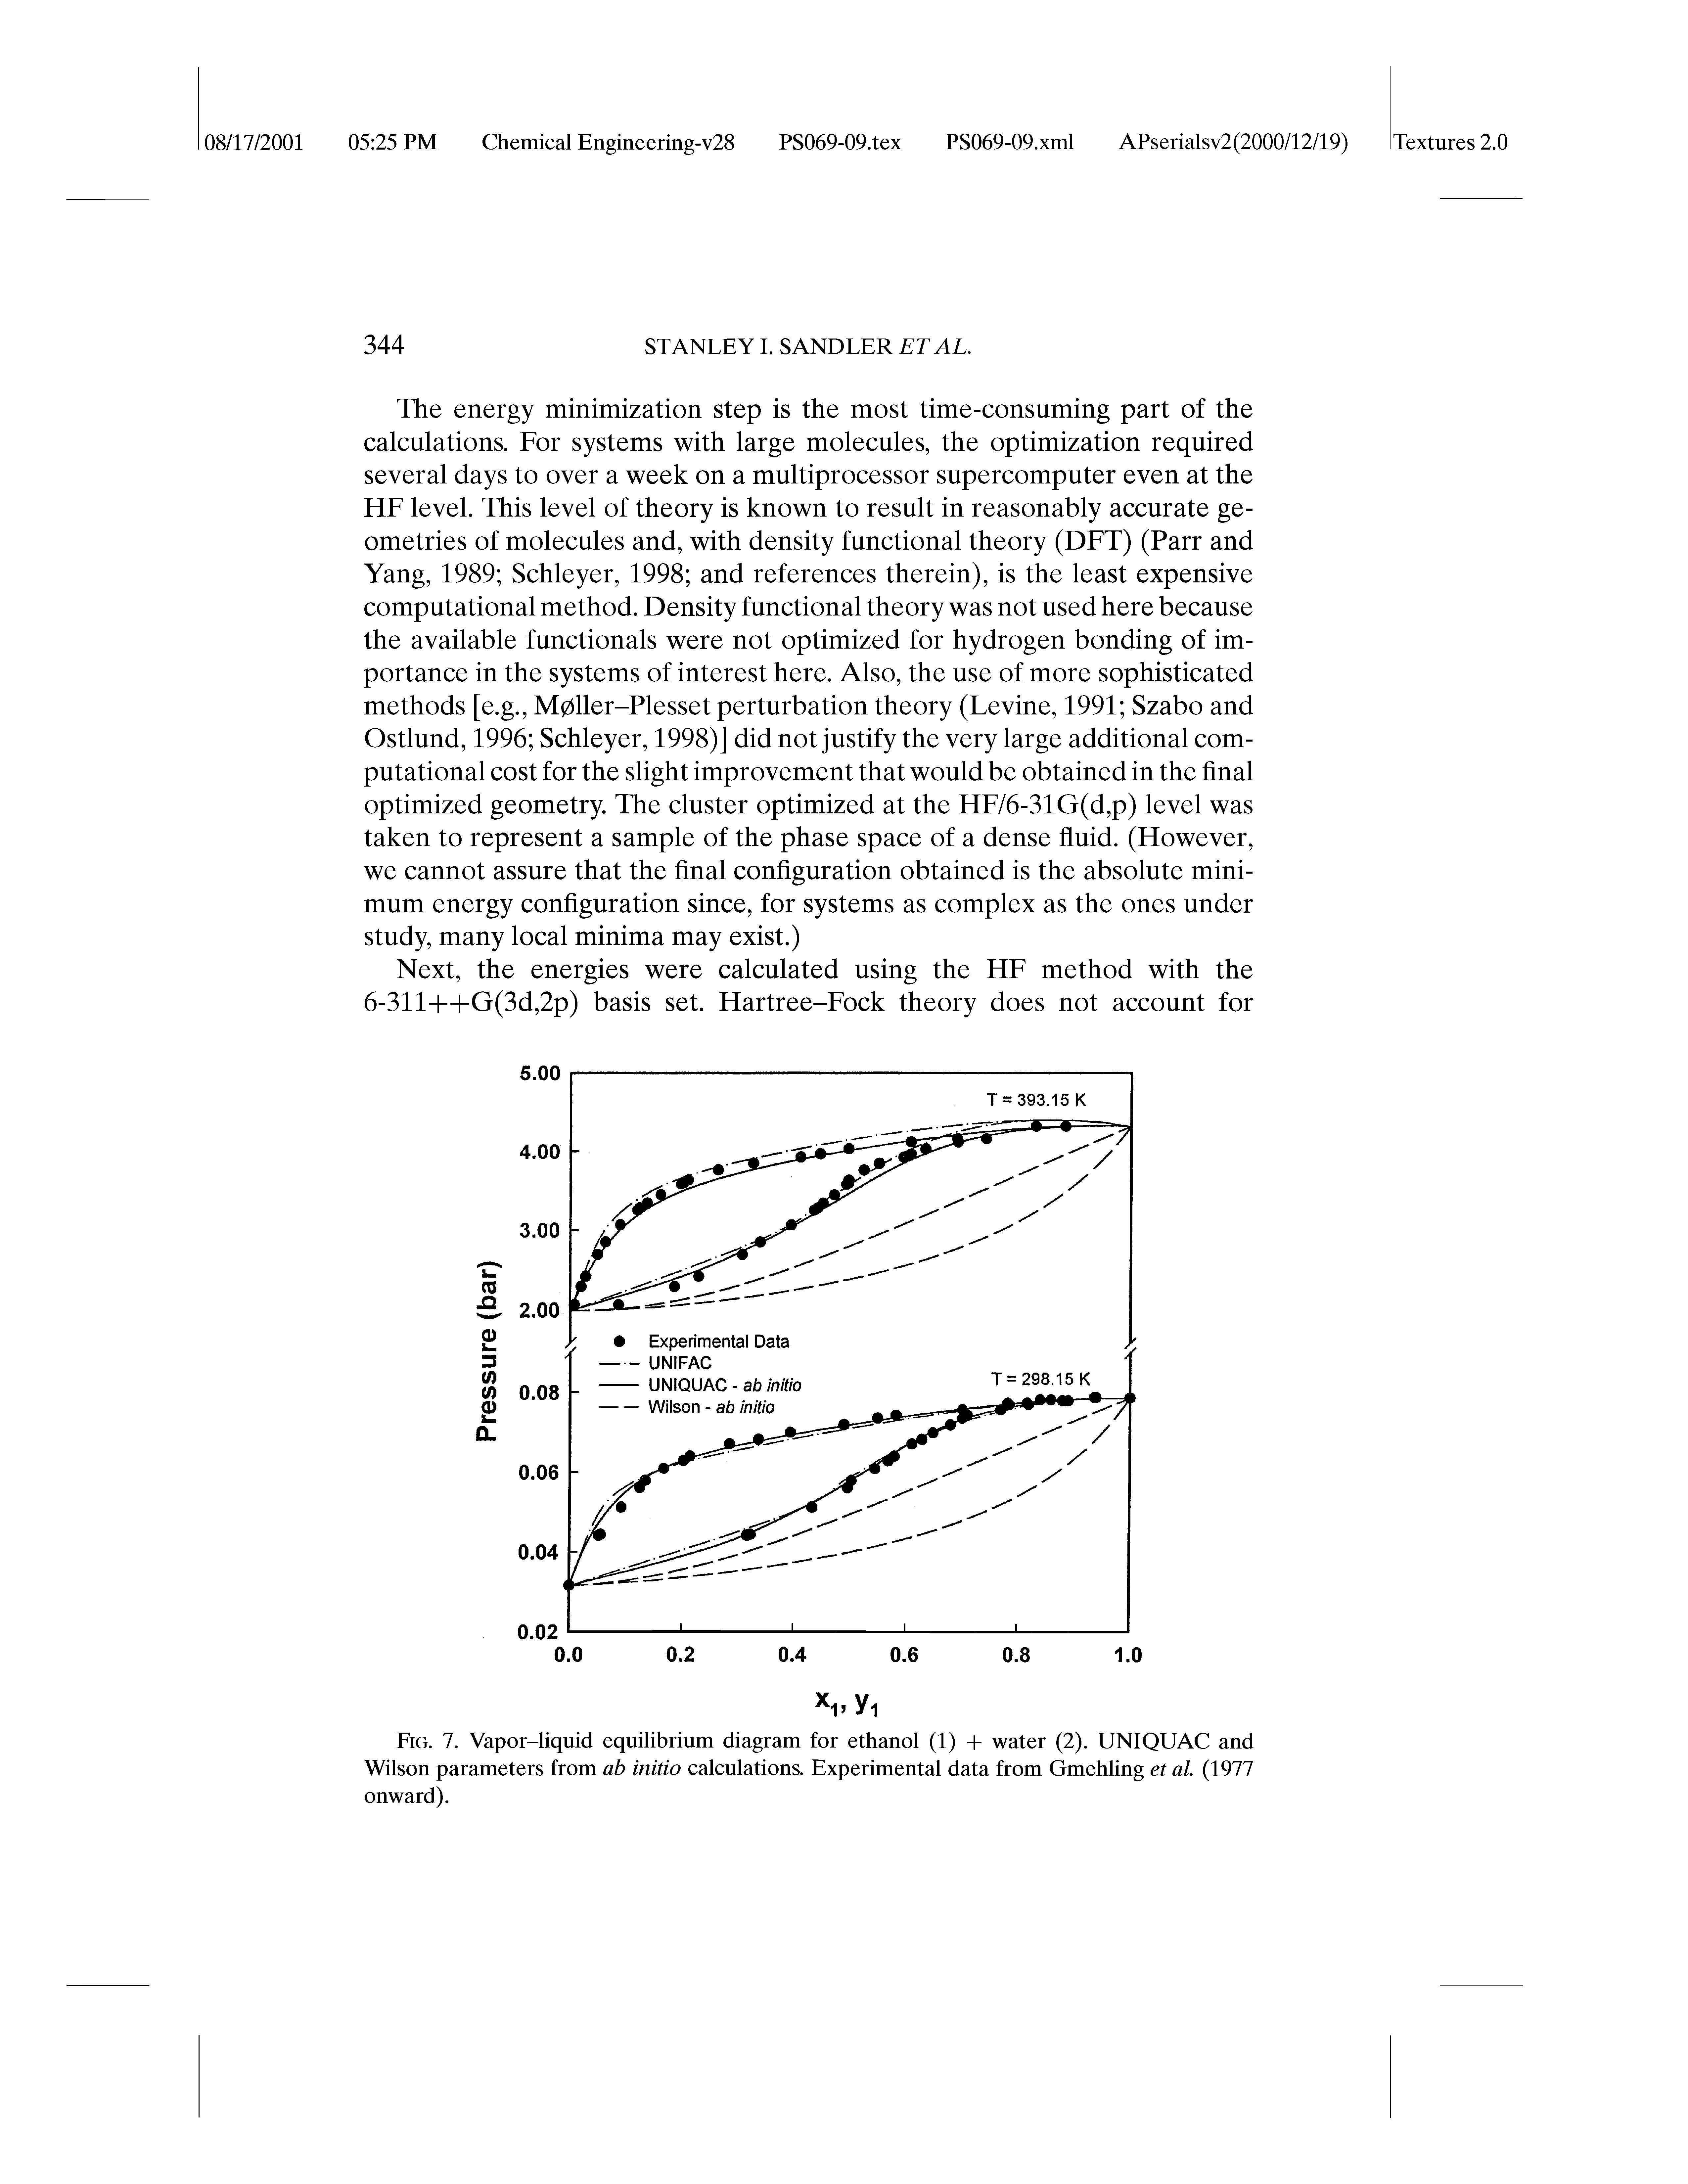 Fig. 7. Vapor-liquid equilibrium diagram for ethanol (1) + water (2). UNIQUAC and Wilson parameters from ab initio calculations. Experimental data from Gmehling et al. (1977 onward).